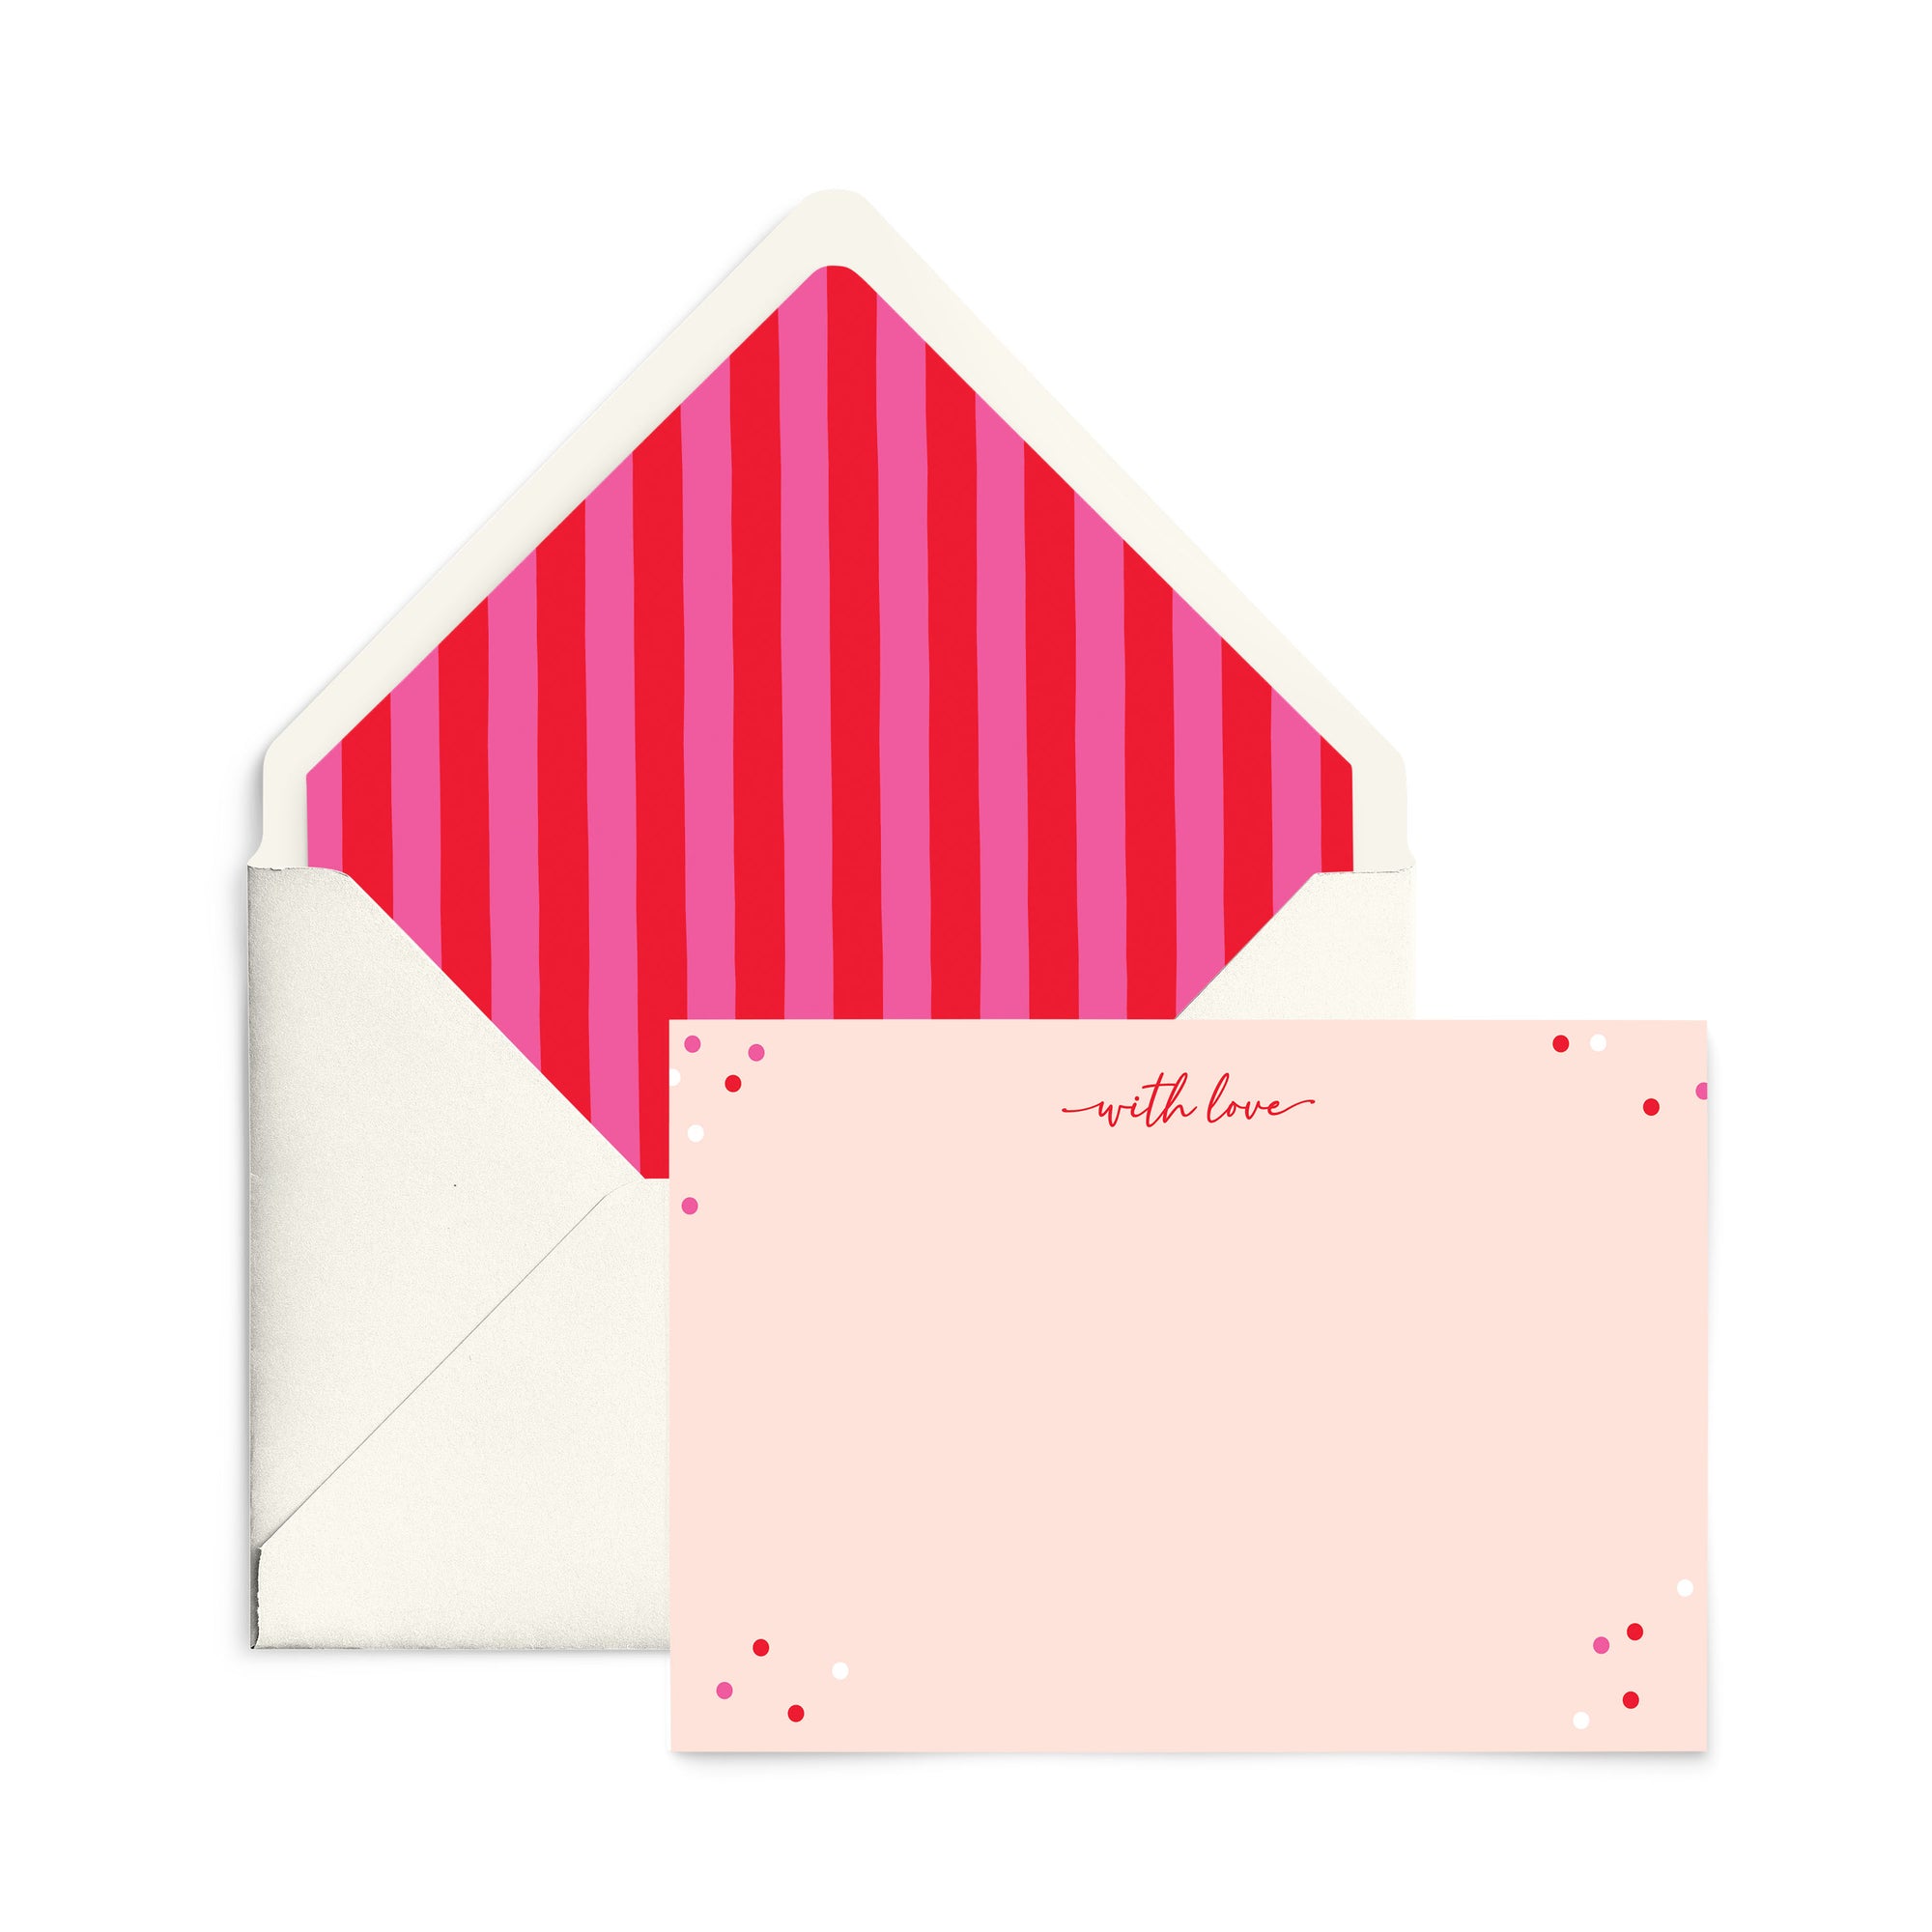  buy personalized notecards online, personalized notecards, custom notecards stationery sets, sorry card, note, love note, bulk order, birthday cards